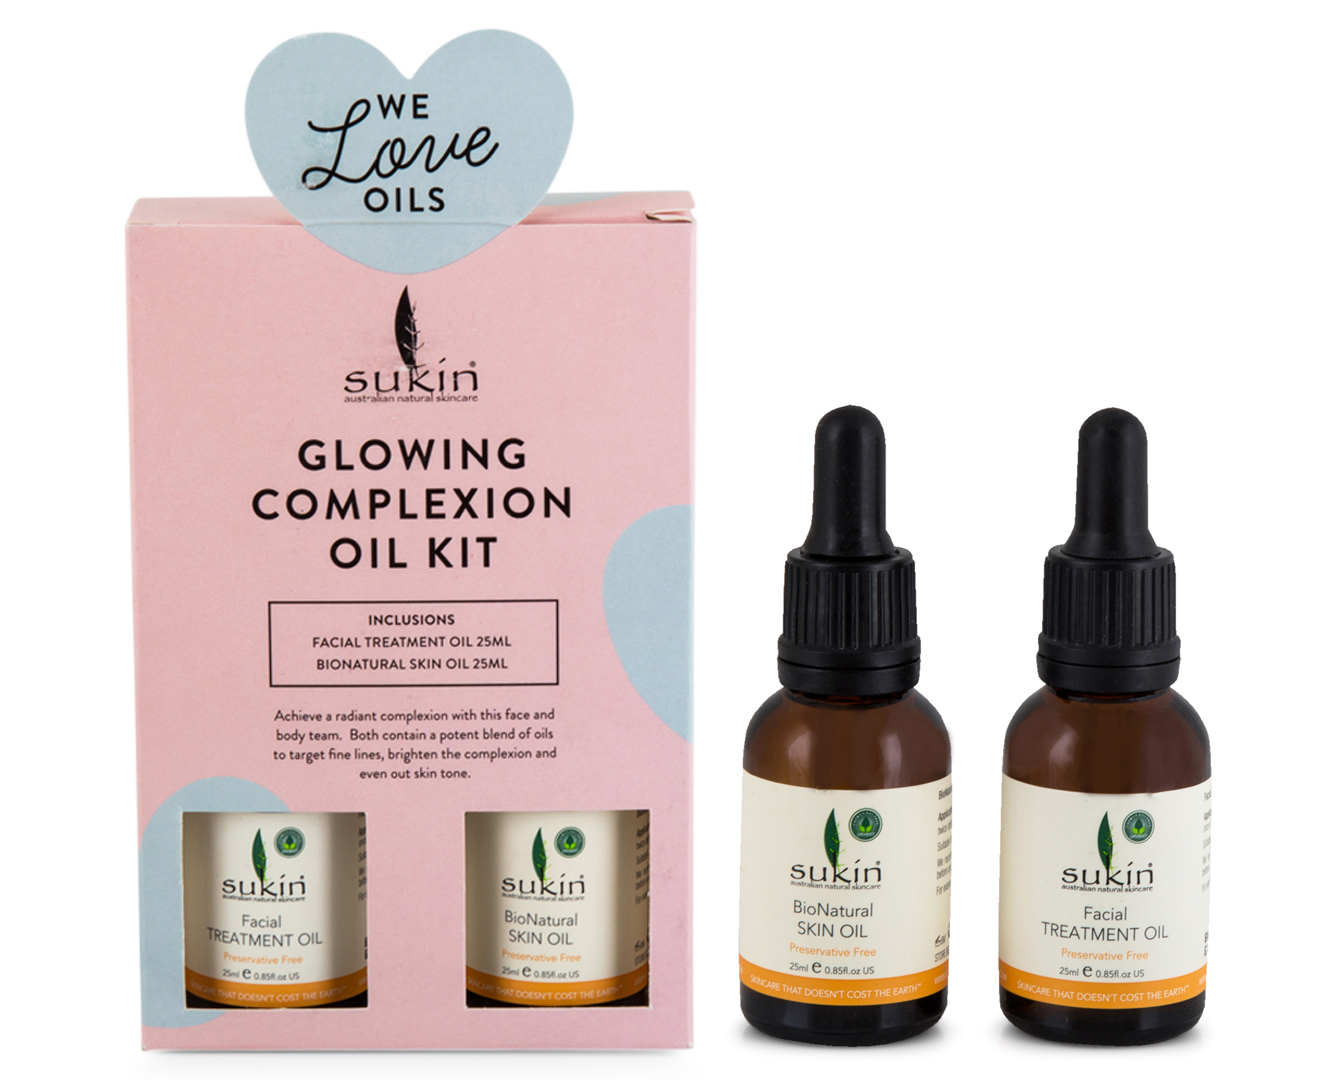 Sukin Glowing Complexion Oil Kit